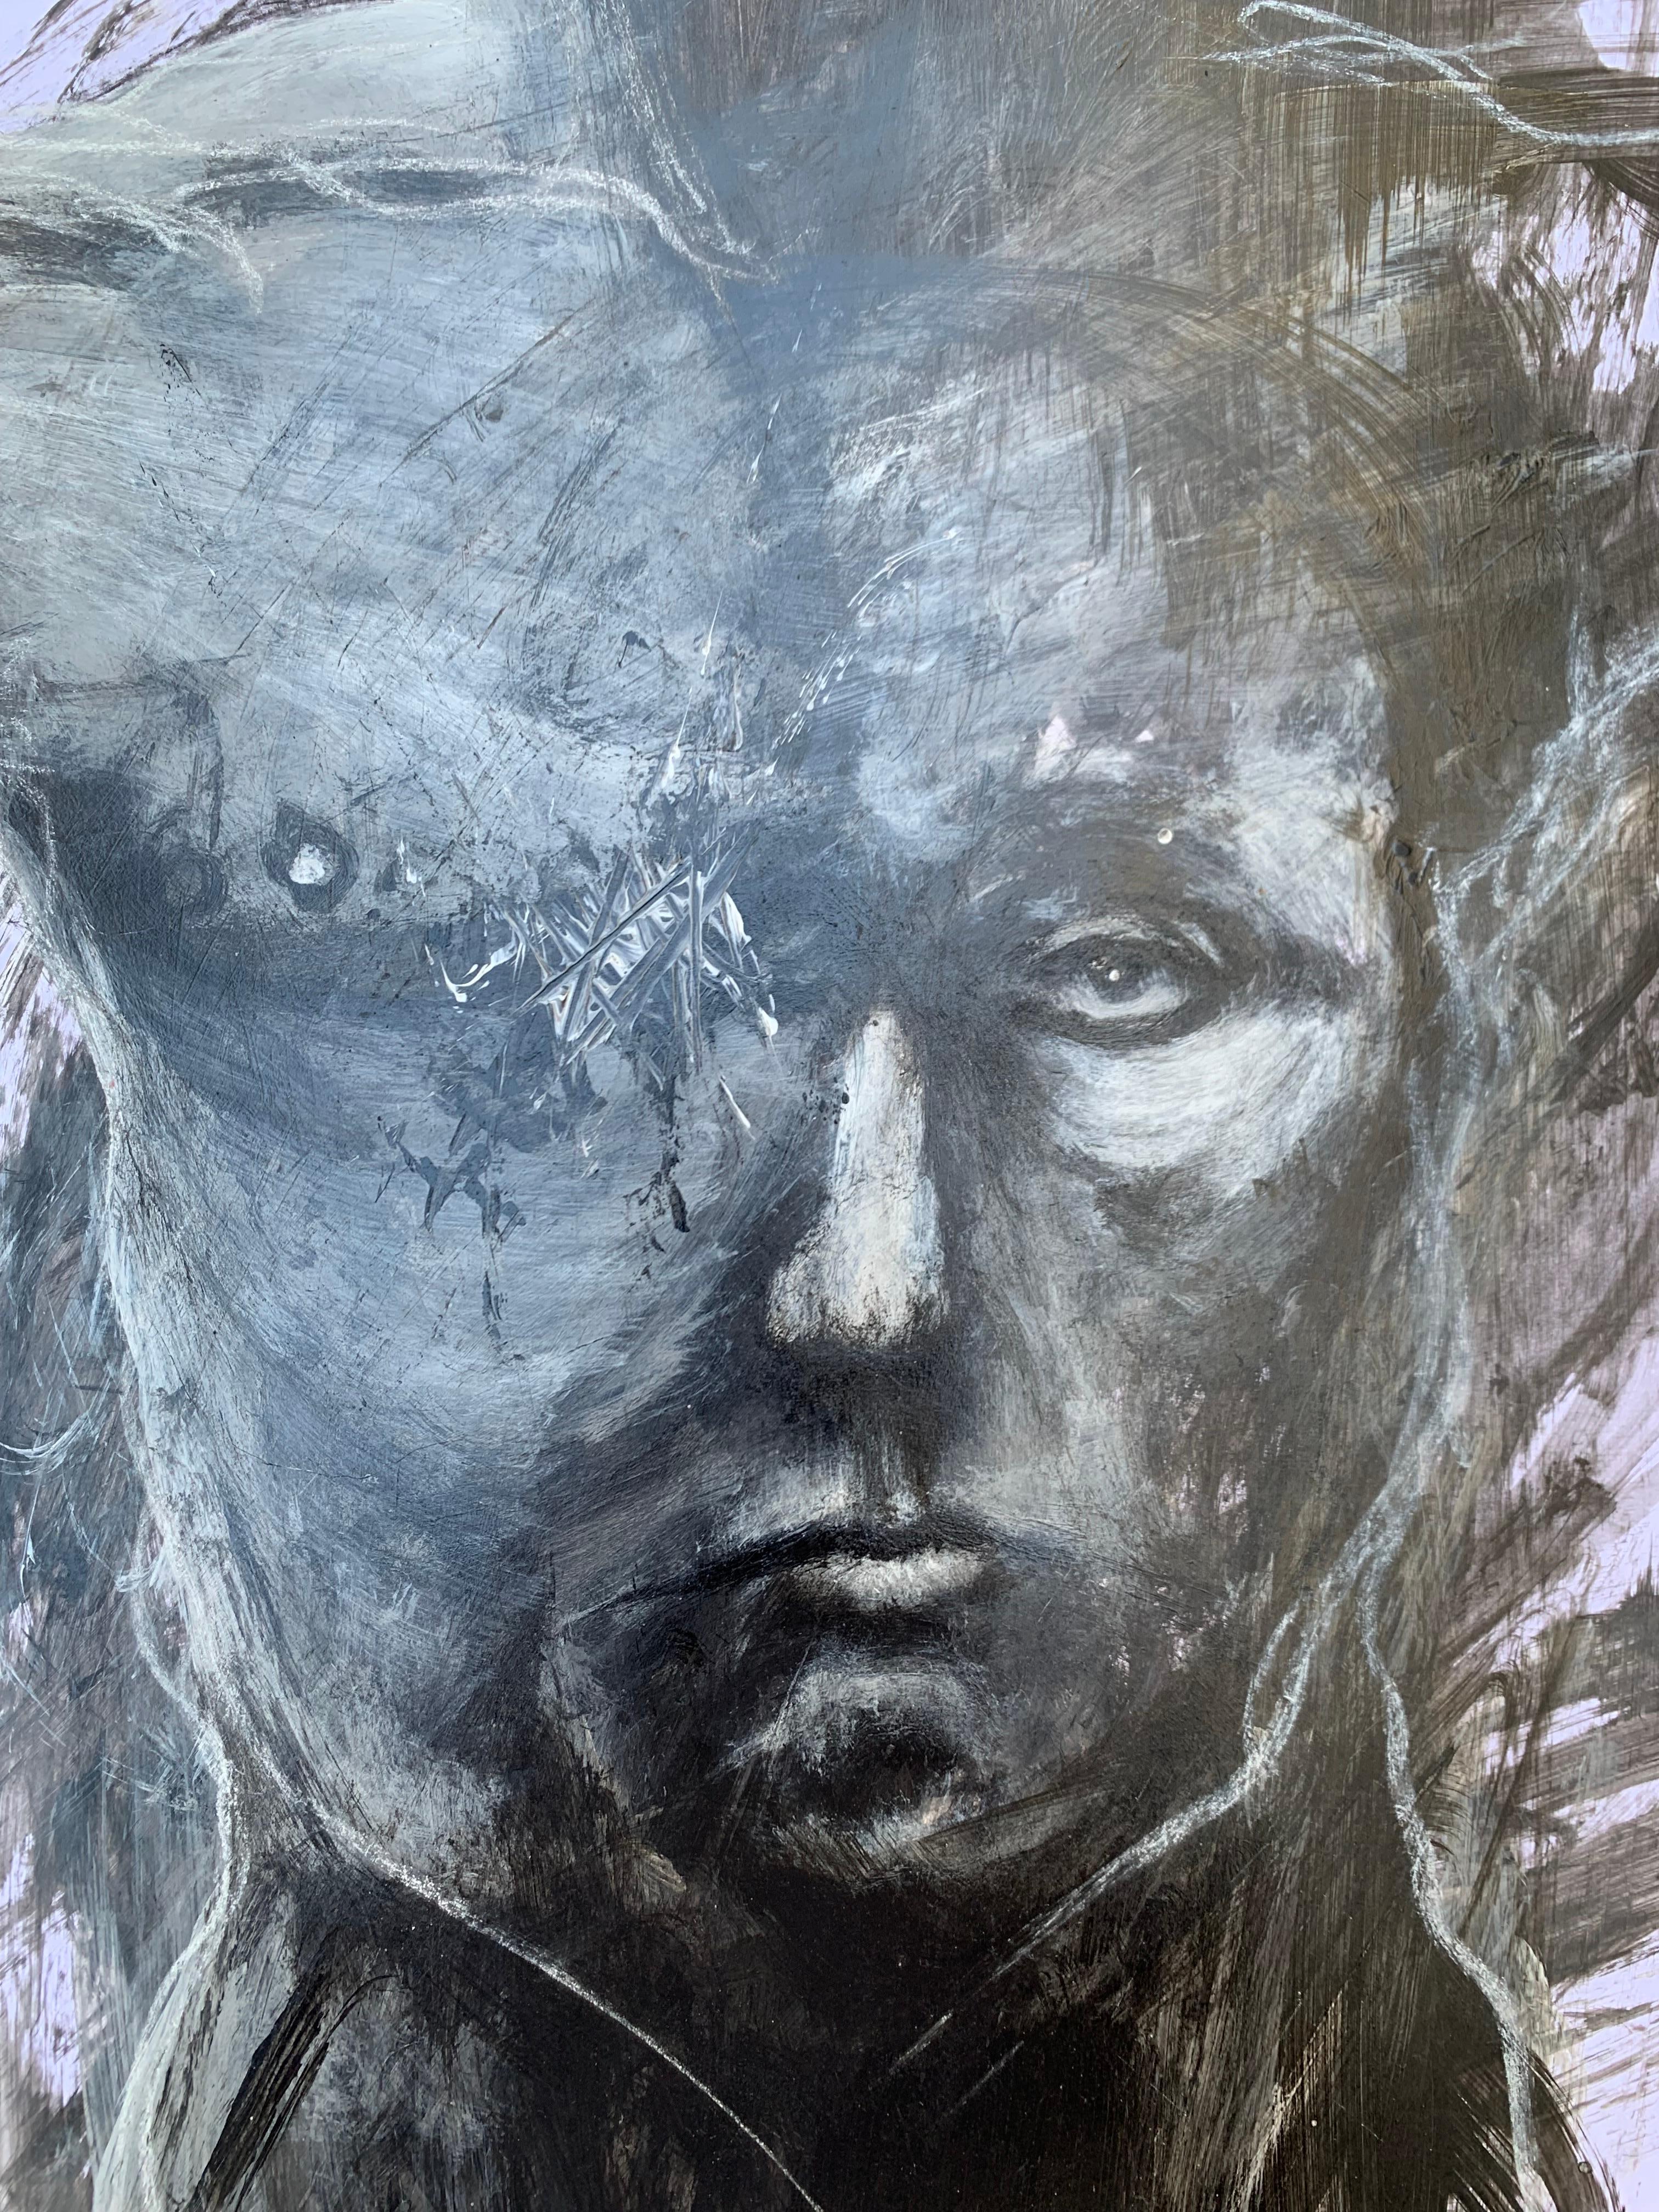 Lemmy Gonthier - Face - Circa 2014
Acrylic
Numbered and signed lower right of the work
Dimensions: 70 x 50

The human body is at the center of Lemmy's work. His taste for large formats requires precision
striking anatomy. The movement that is